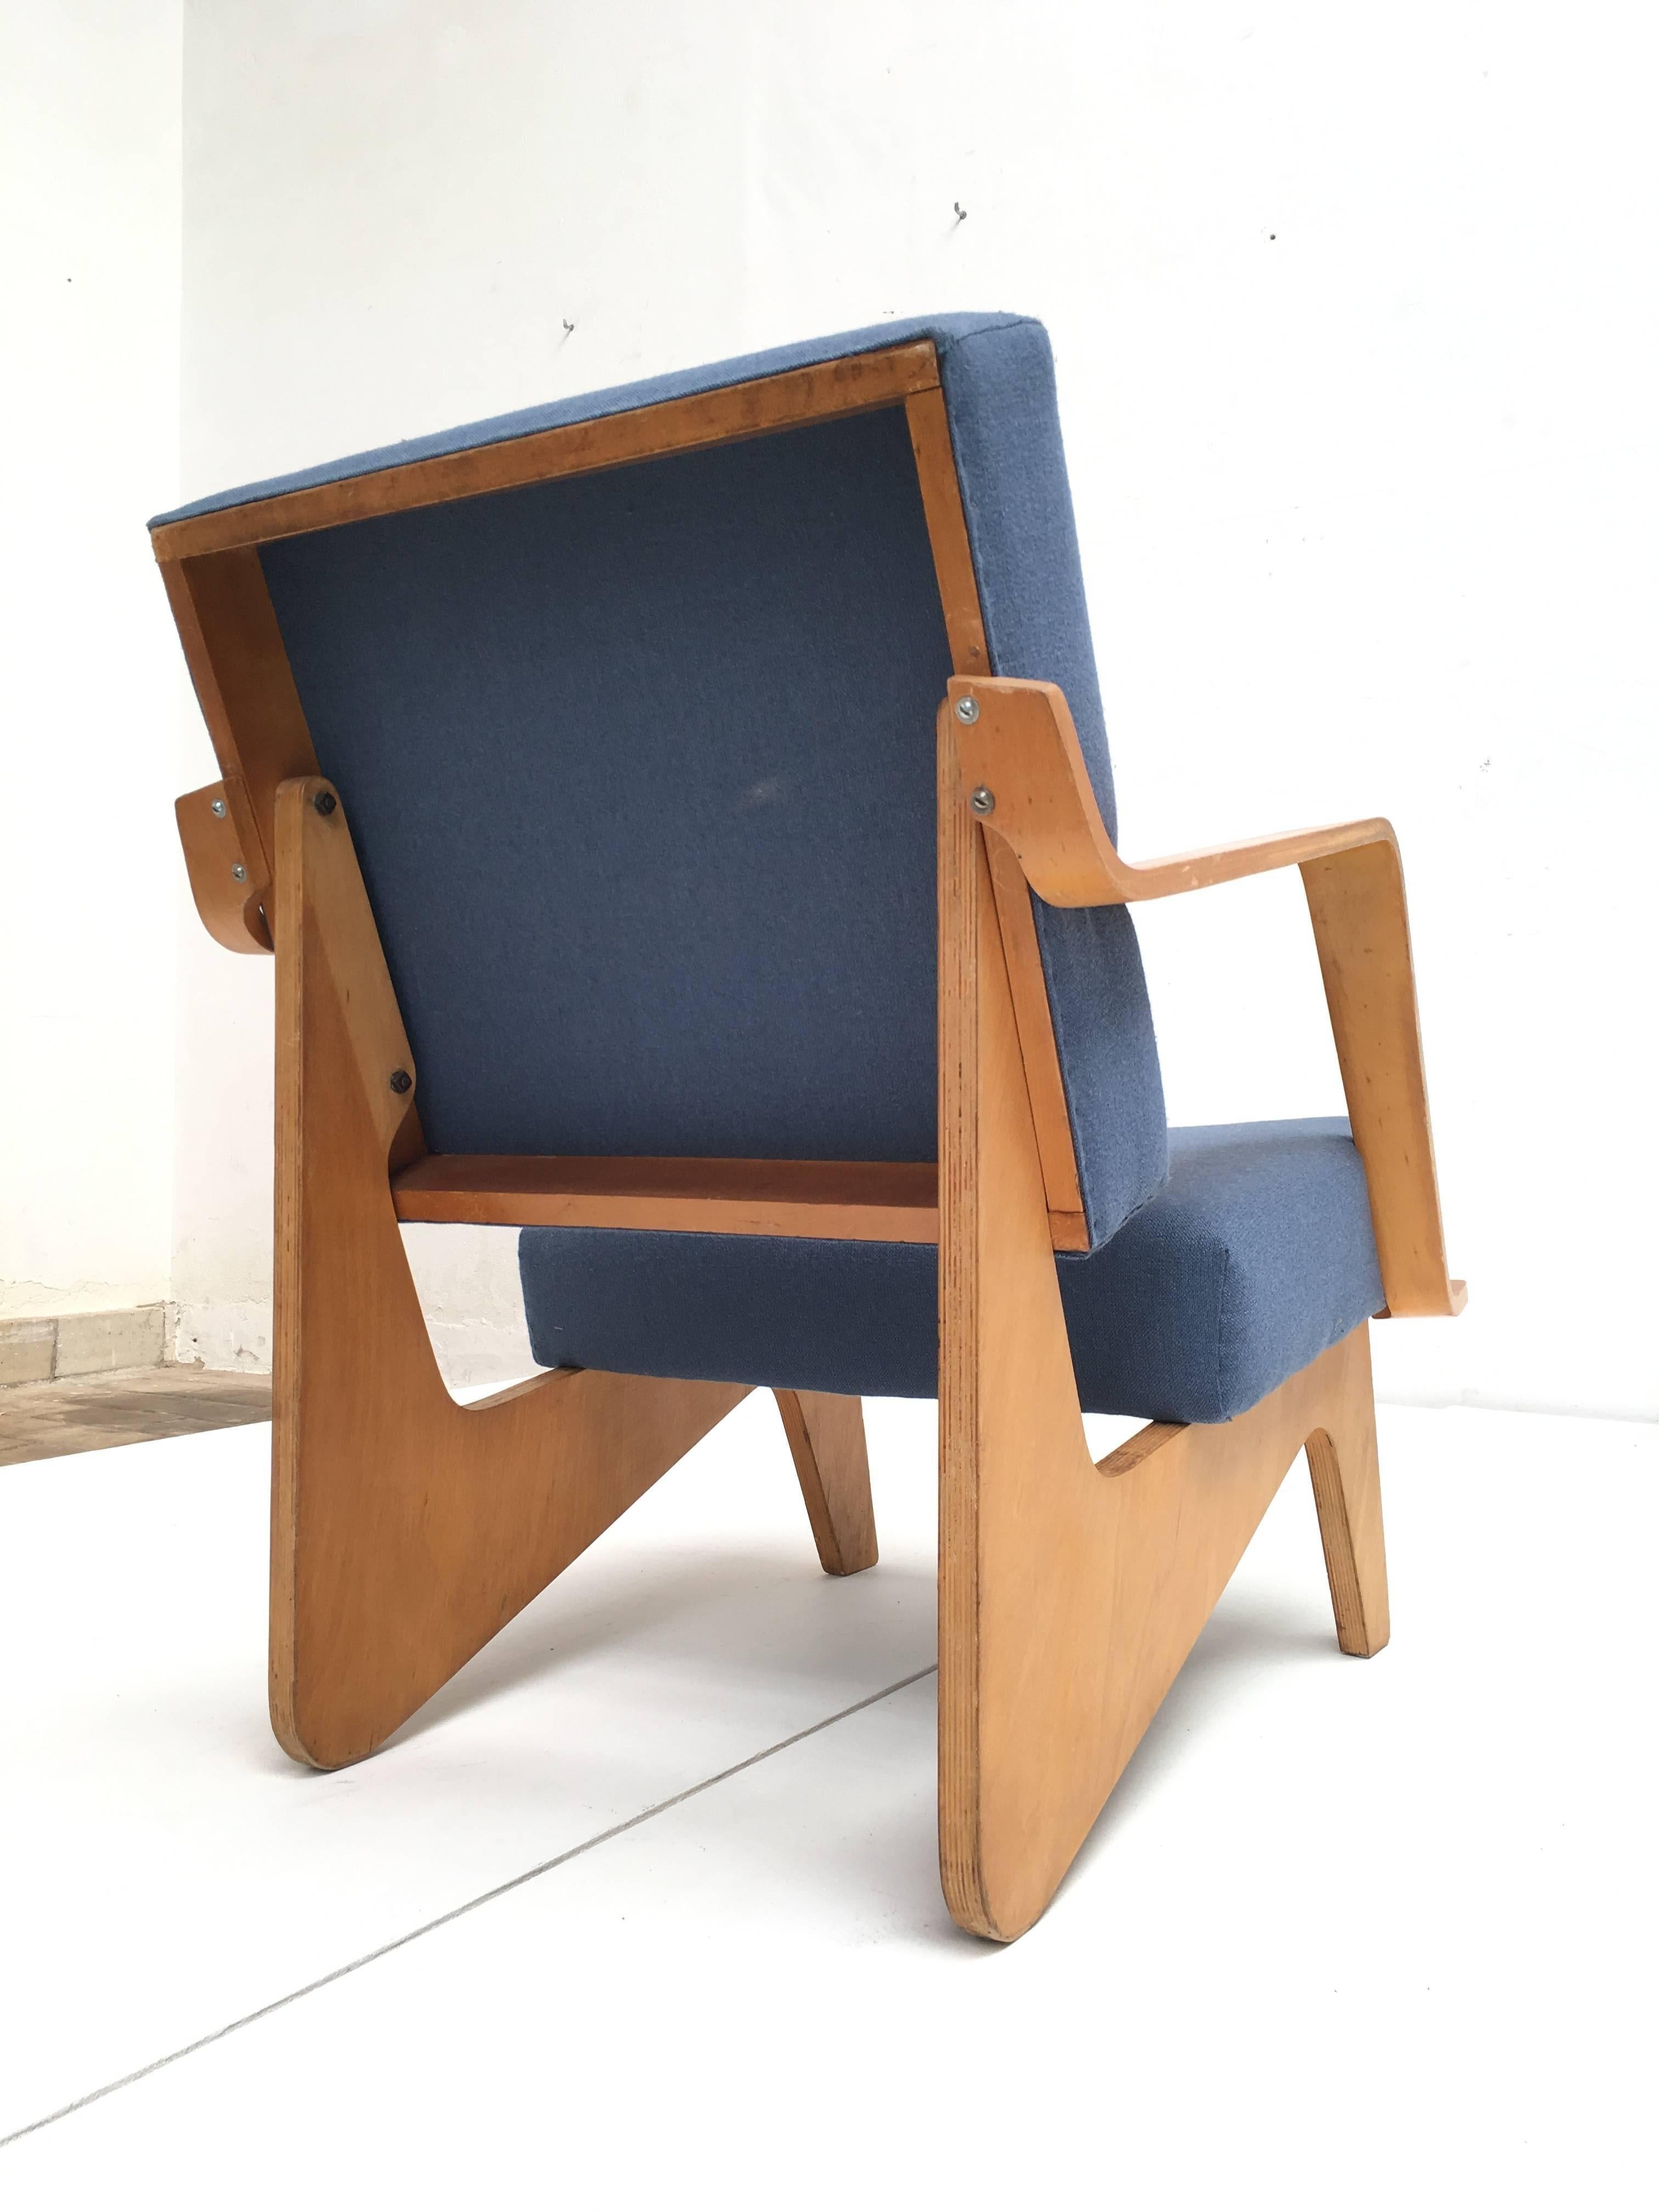 Dutch Birch Plywood FB03 Combex Plywood Armchair by Cees Braakman for UMS Pastoe, 1952